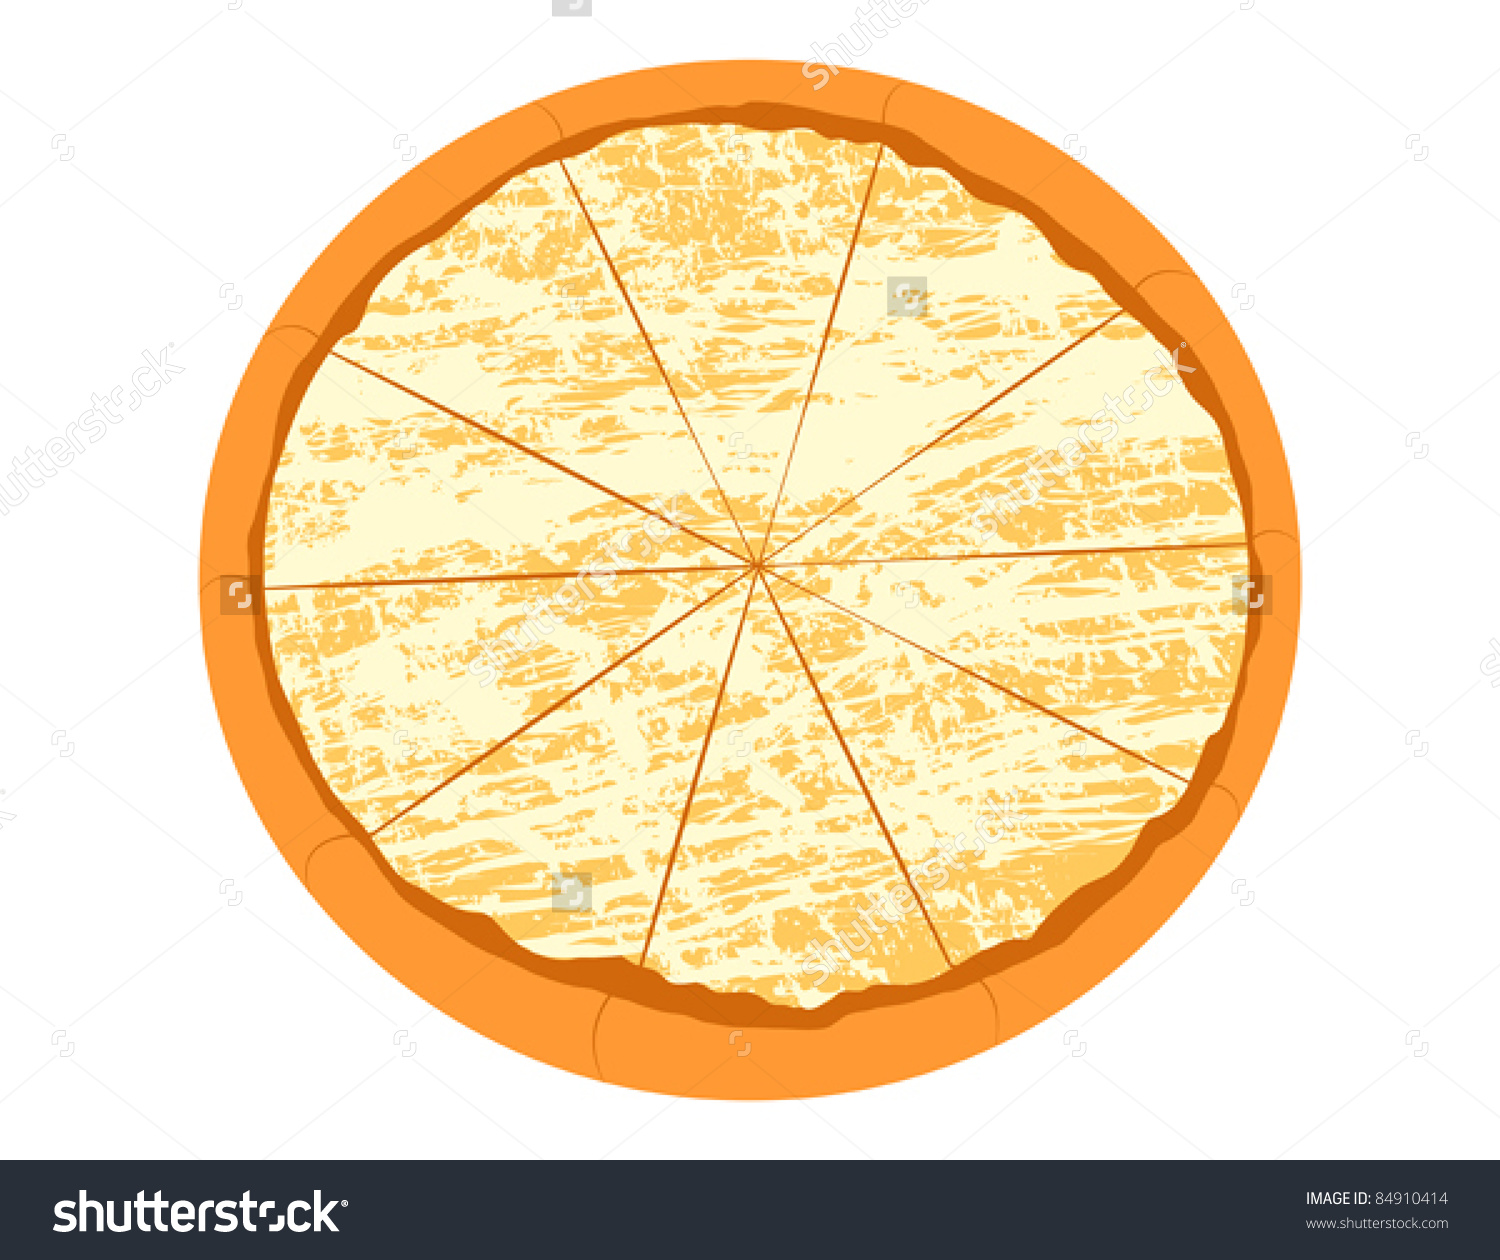 Cheese Pizza Clip Art Image -